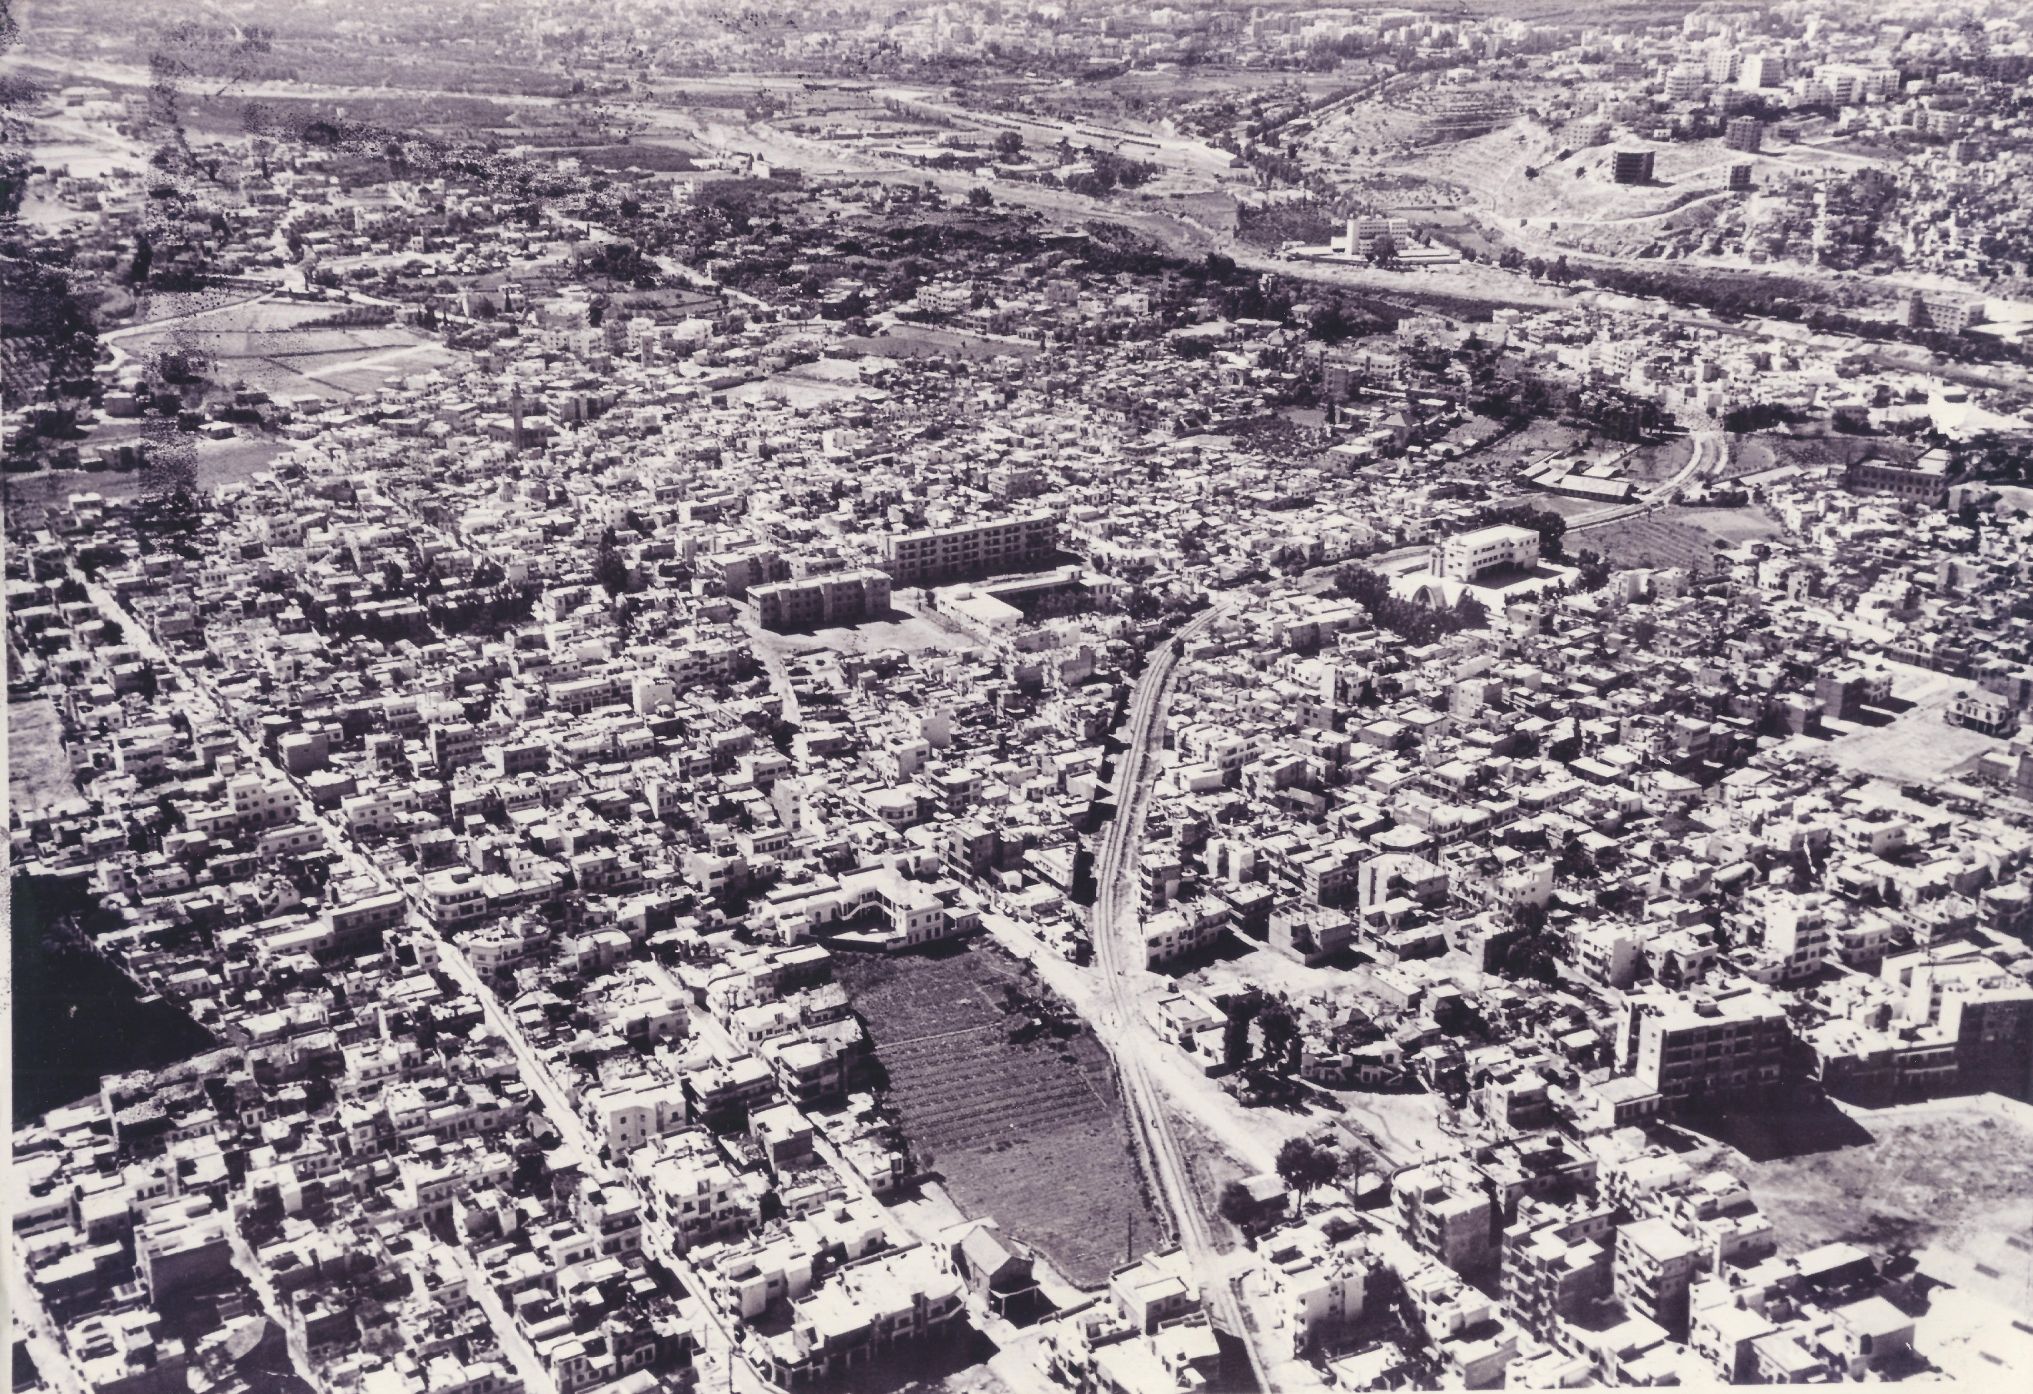 A panorama of Bourj Hammoud in the 1950s, featuring Nor Sis neighborhood and sections of Nor Adana and Nor Marash, named after the Armenian communities original villages. Photo courtesy of the Garo Derounian col (1)